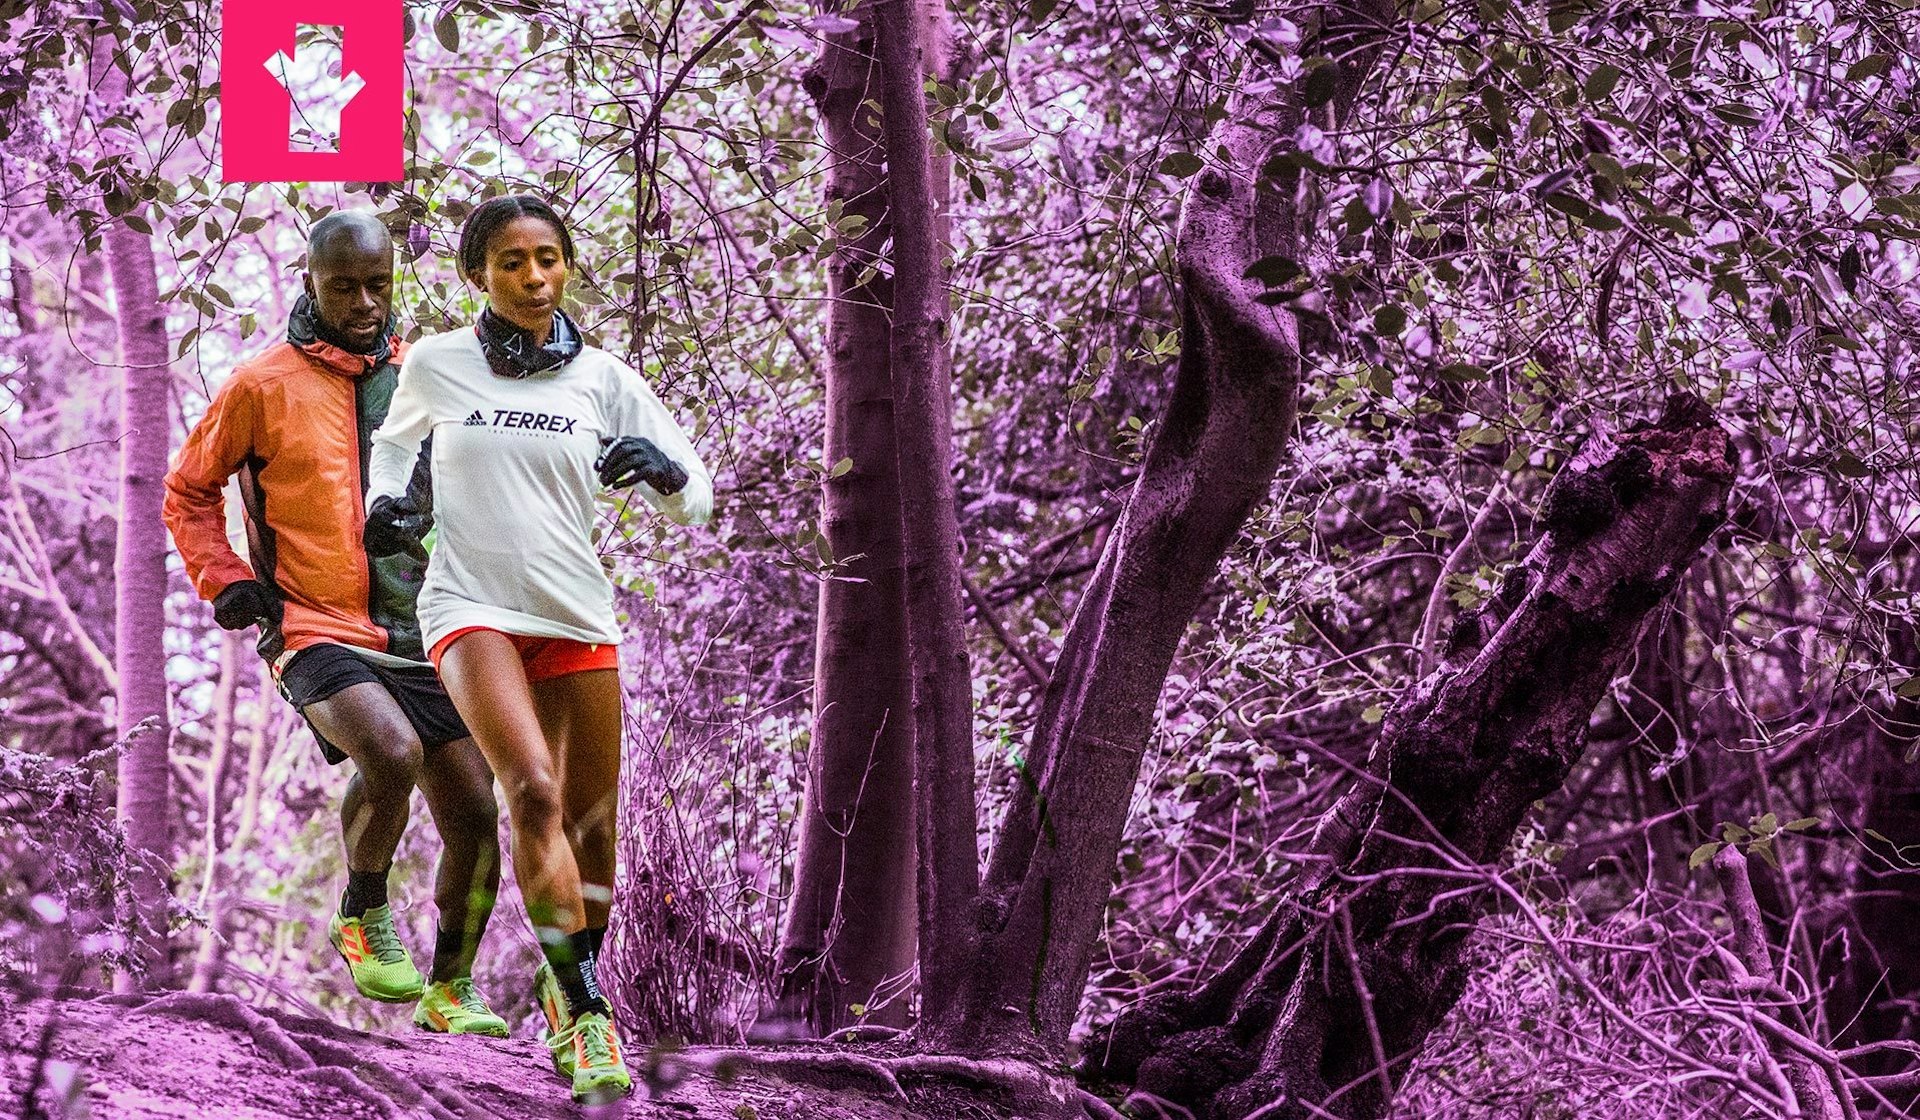 Black Trail Runners on why they do what they do